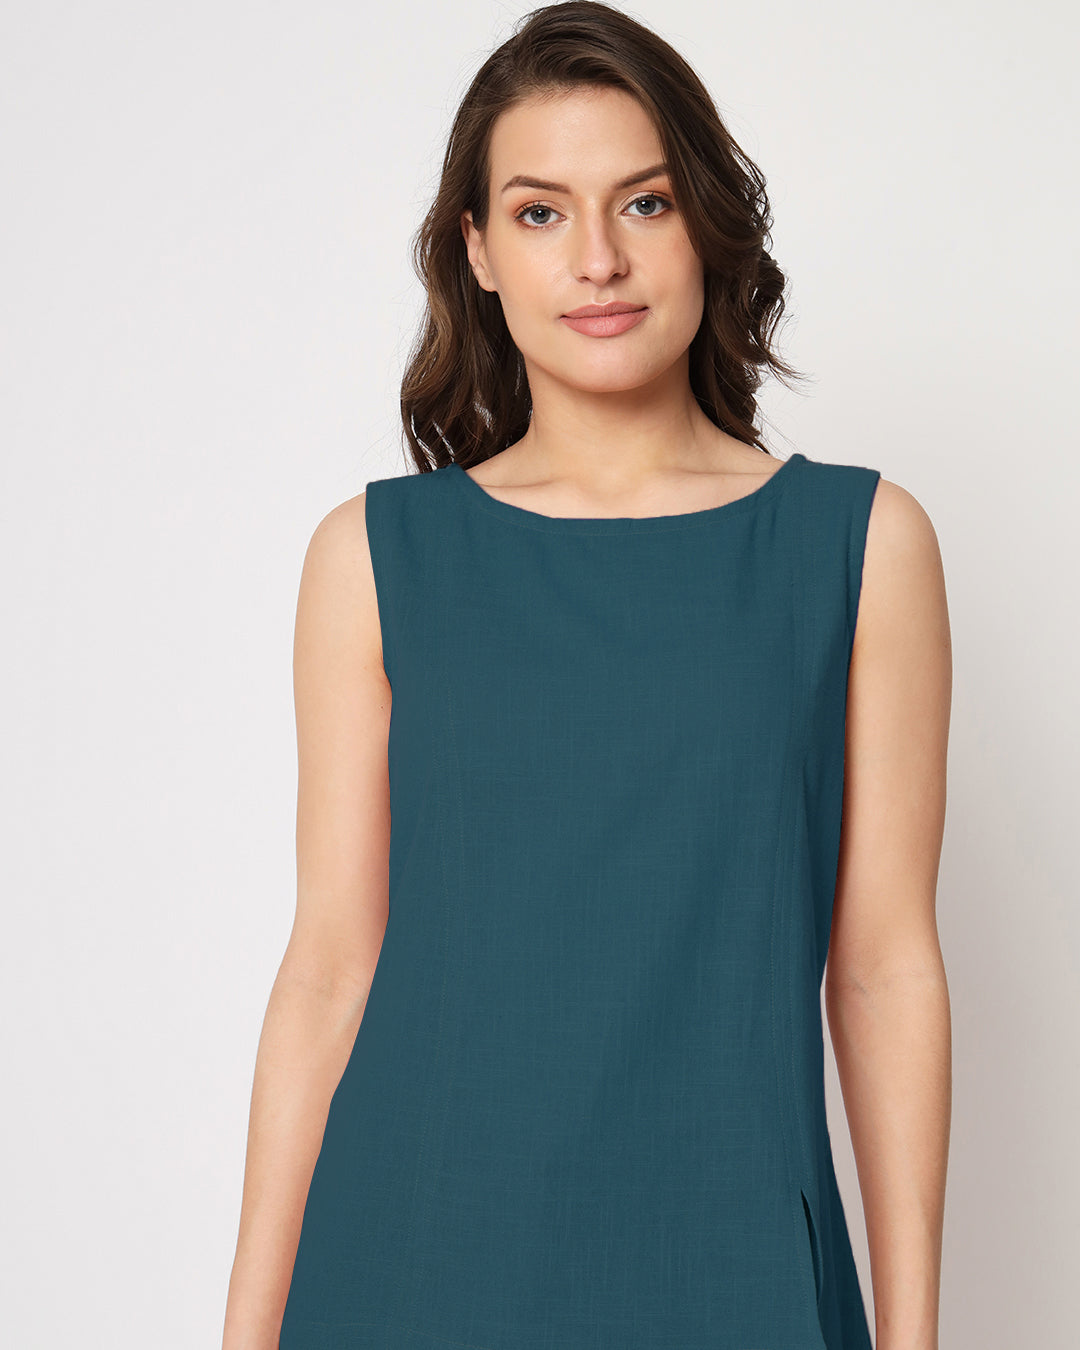 Deep Teal Sleeveless Short Length Solid Top (Without Bottoms)